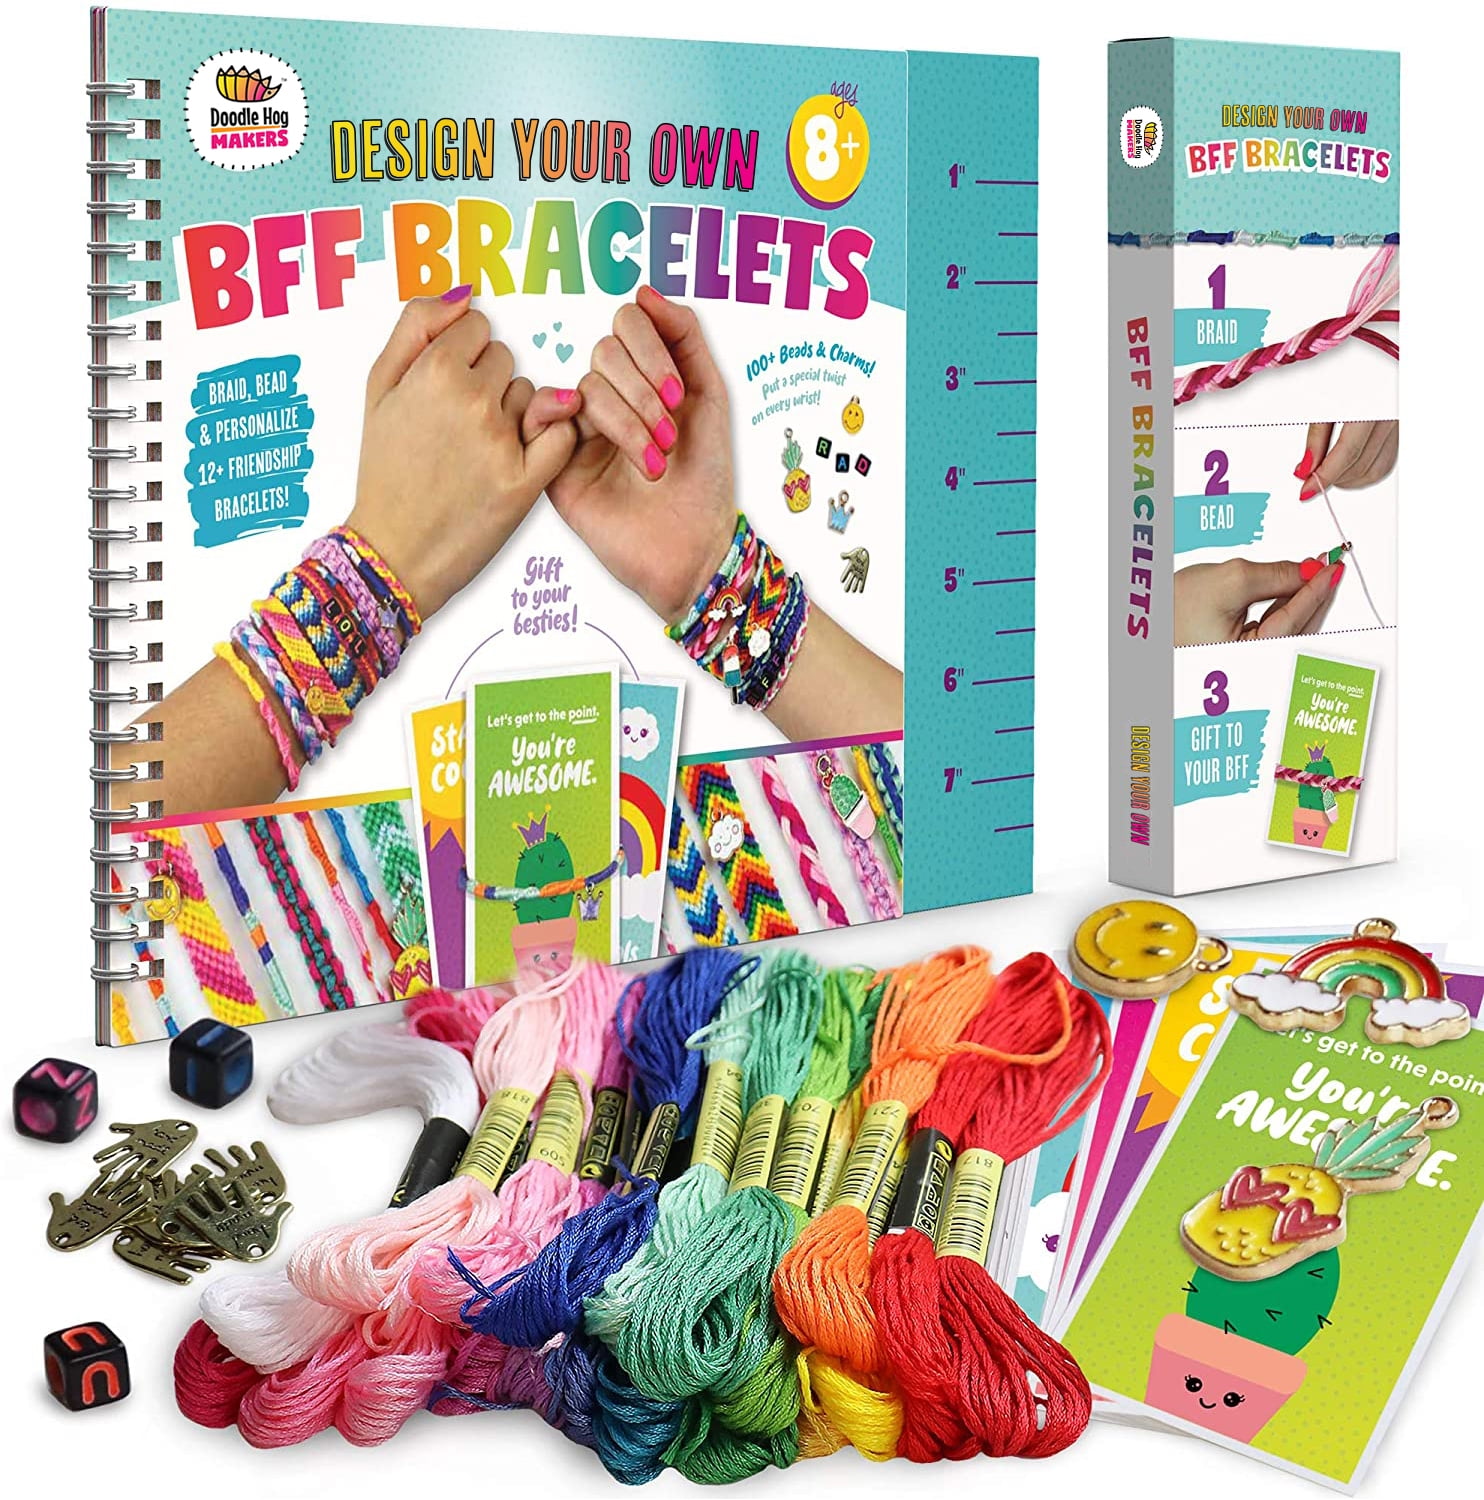 Friendship Bracelet Making Beads Kit, Letter Beads, 22 Multi-Color  Embroidery Floss "A-Z" Alphabet Beads Bracelets String Kit for Friendship  Bracelets, Jewelry Making Size 22 